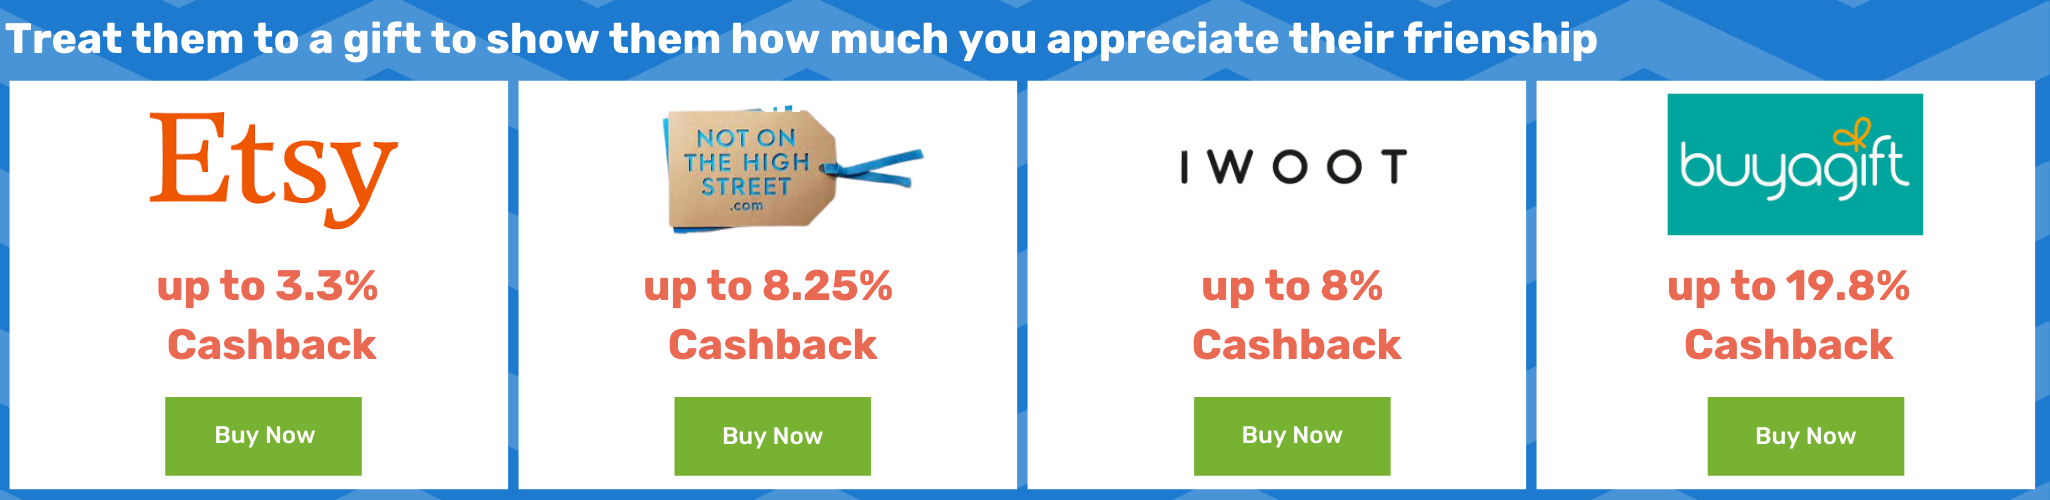 Treat them to a gift to show how much you appreciate them - etsy up to 3.3% Cashback - NOTHS up to 8.25% Cashback - IWOOT up to 8% Cashback - buyagift up to 19.8% Cashback